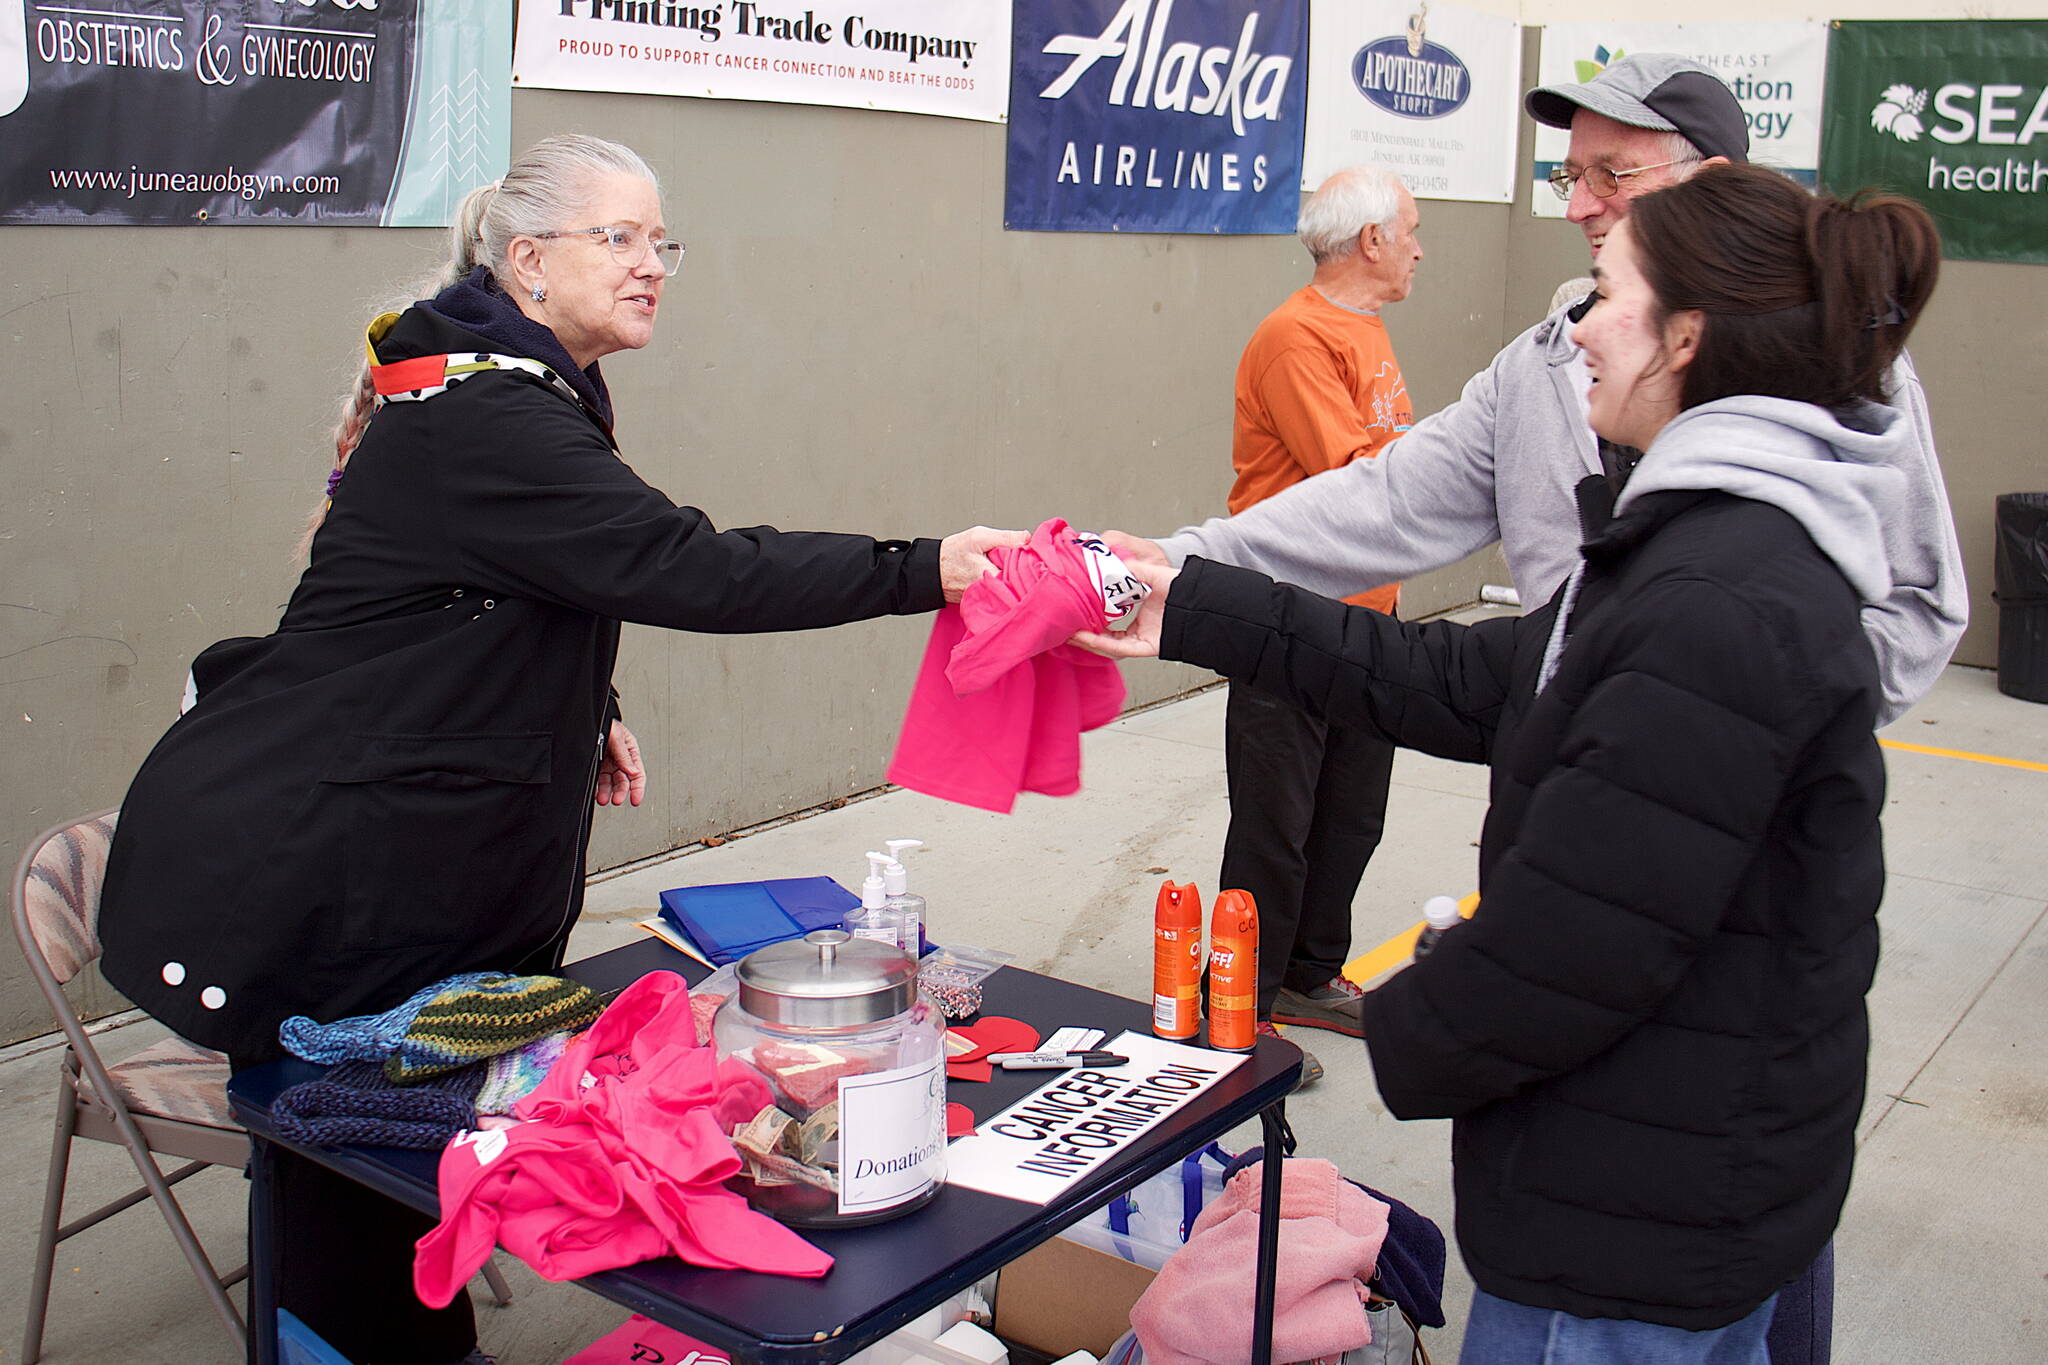 John Eldridge and his daughter, Lisa, 21, get a pink cancer awareness t-shirt from Eileen Hosey, vice president of Cancer Connection, before the start of the 32nd Annual Beat the Odds: A Race Against Cancer event at Kax̱dig̱oowu Héen Elementary School on Saturday morning. The race is a fundraiser for Cancer Connection, which provides services such as travel assistance for people needing treatment outside Juneau. (Mark Sabbatini / Juneau Empire)